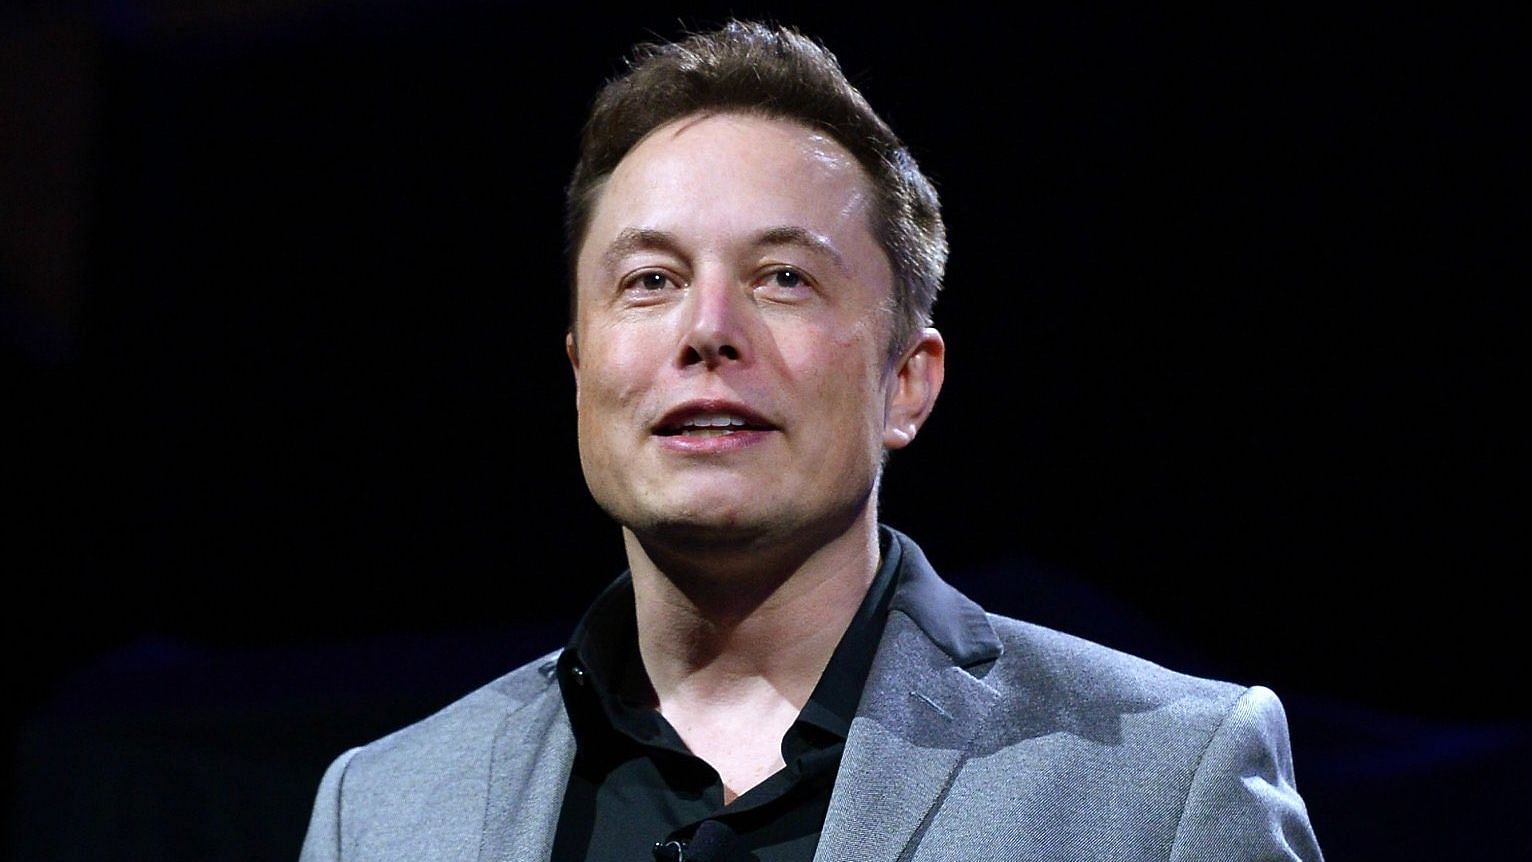 Tesla CEO Elon Musk said on Wednesday, 24 March, that people in the US can now buy a Tesla with Bitcoins.